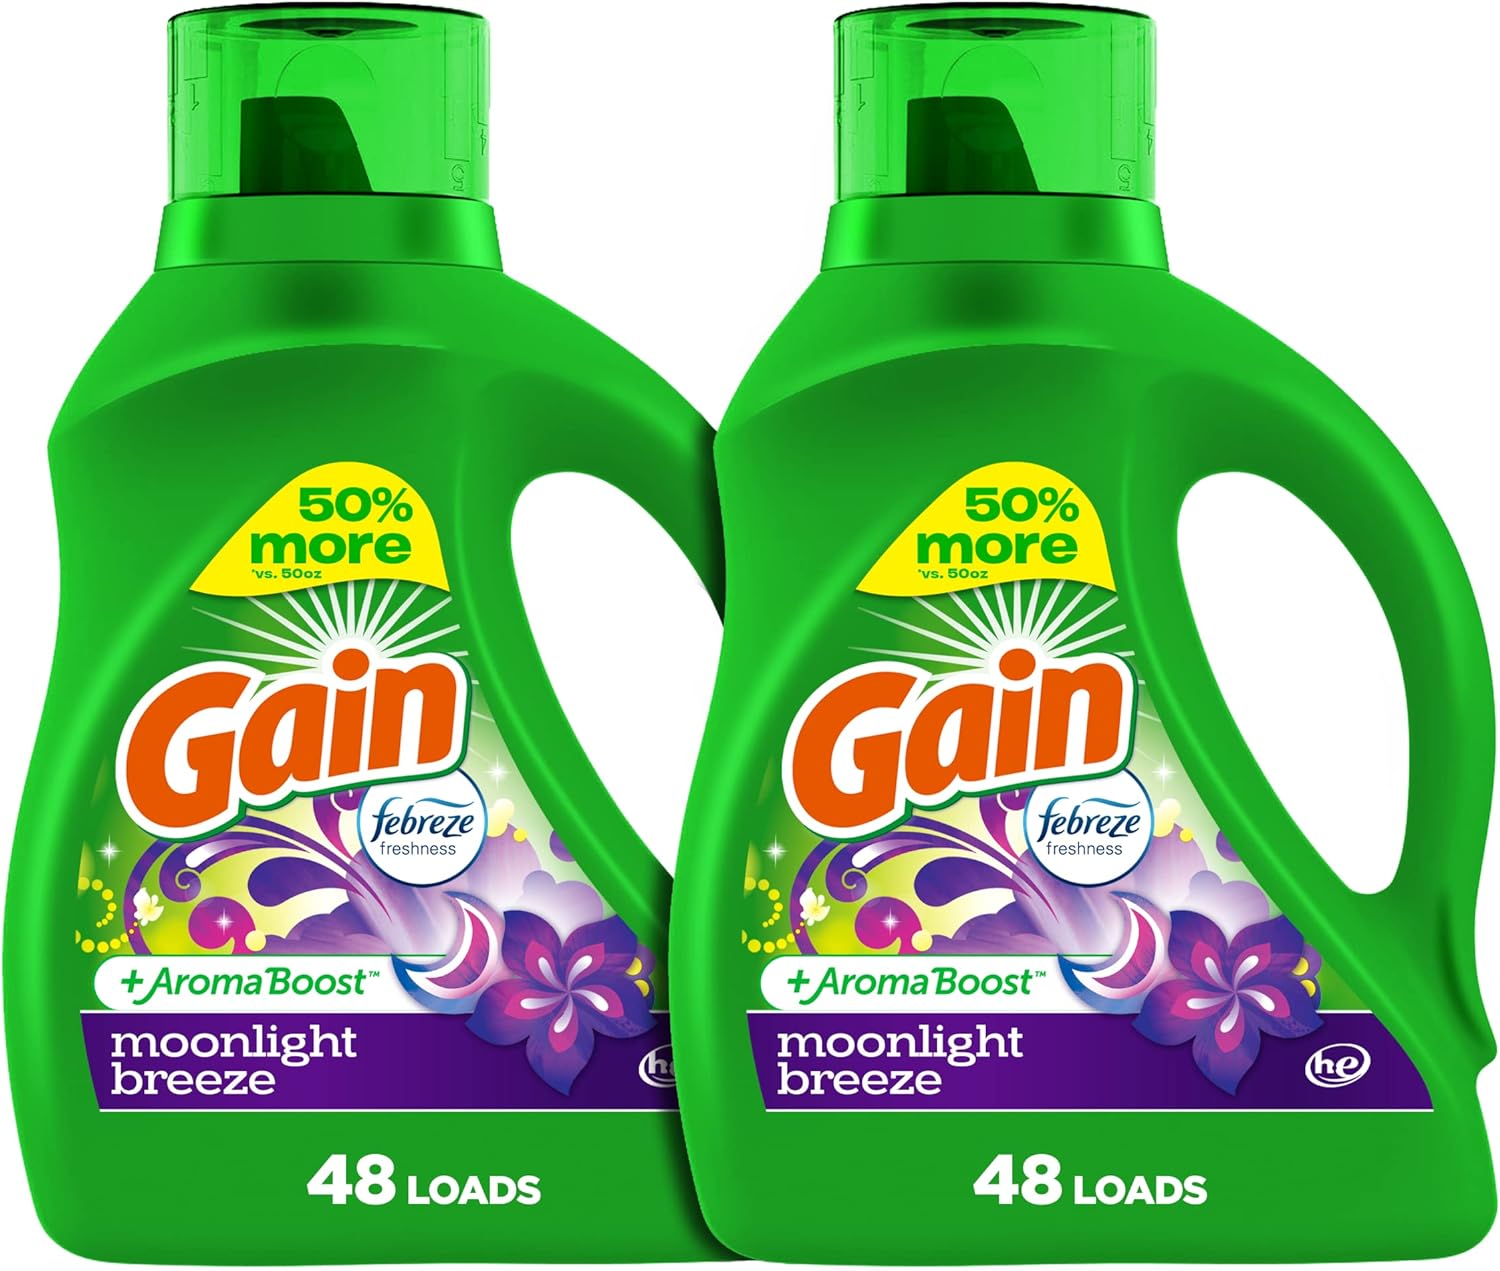 2-Count 65-Oz Gain + Aroma Boost Liquid Laundry Detergent (Moonlight Breeze) + $4 Amazon Promotional Credit $12.70 w/ S&S + Free Shipping w/ Prime or on $35+